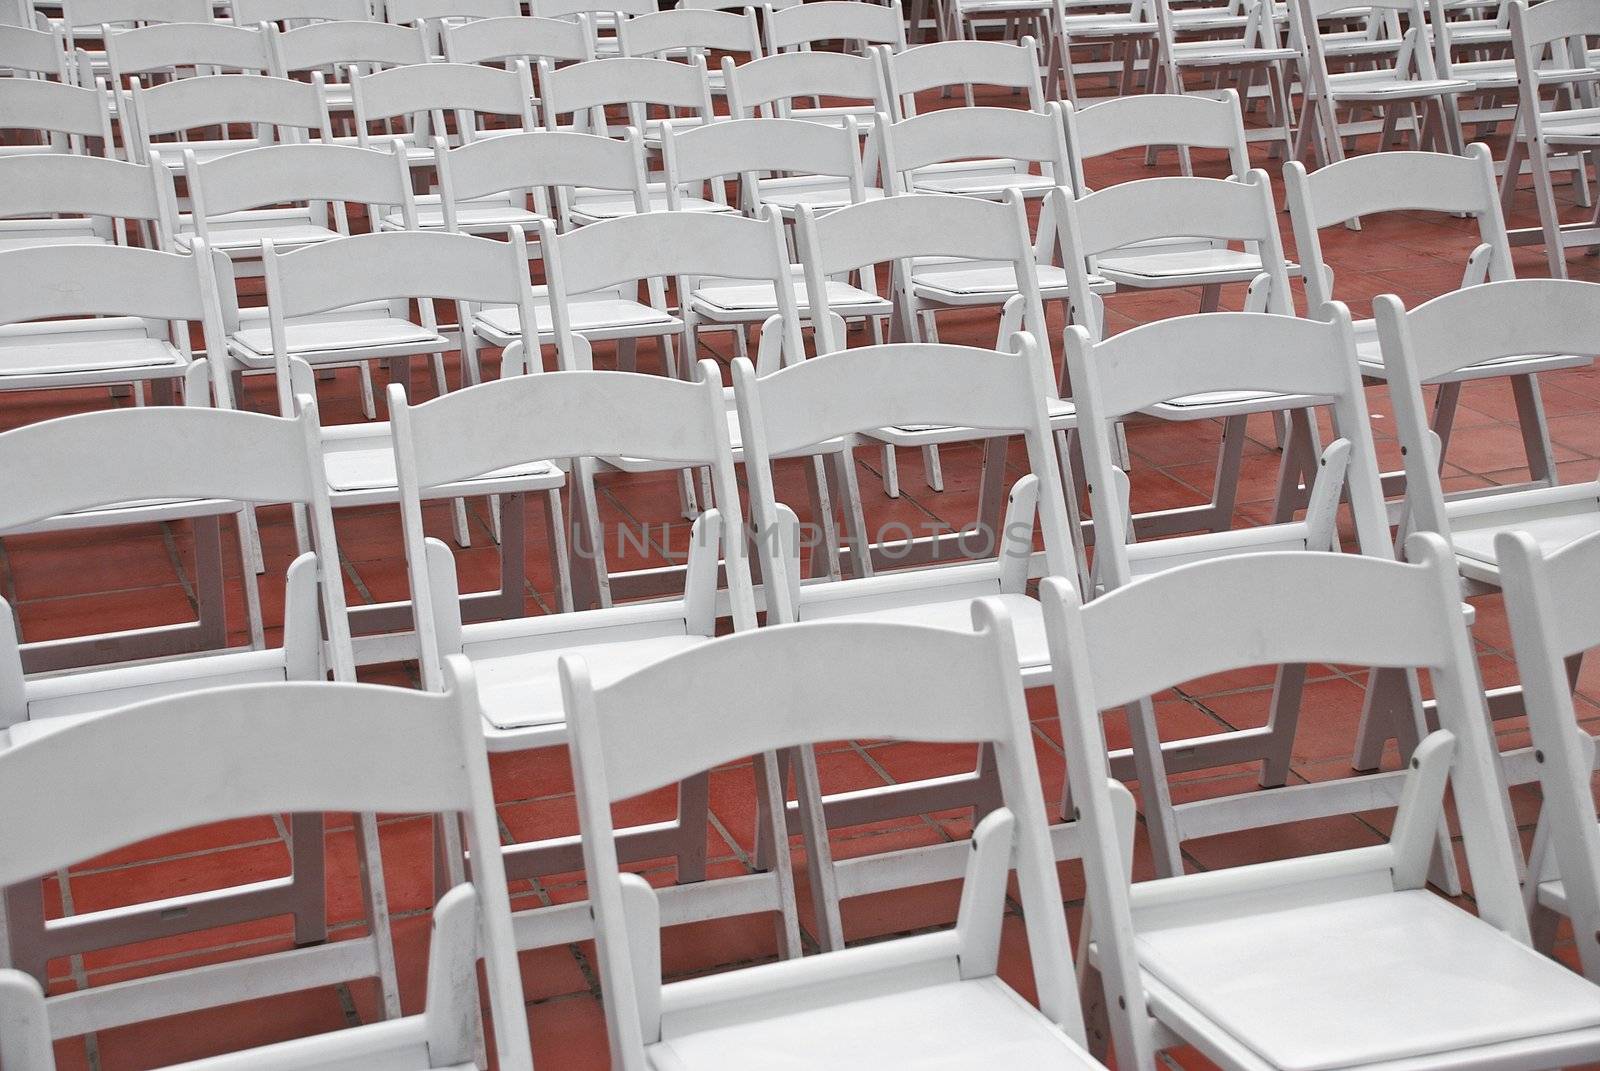 White Catering Chairs by pixelsnap